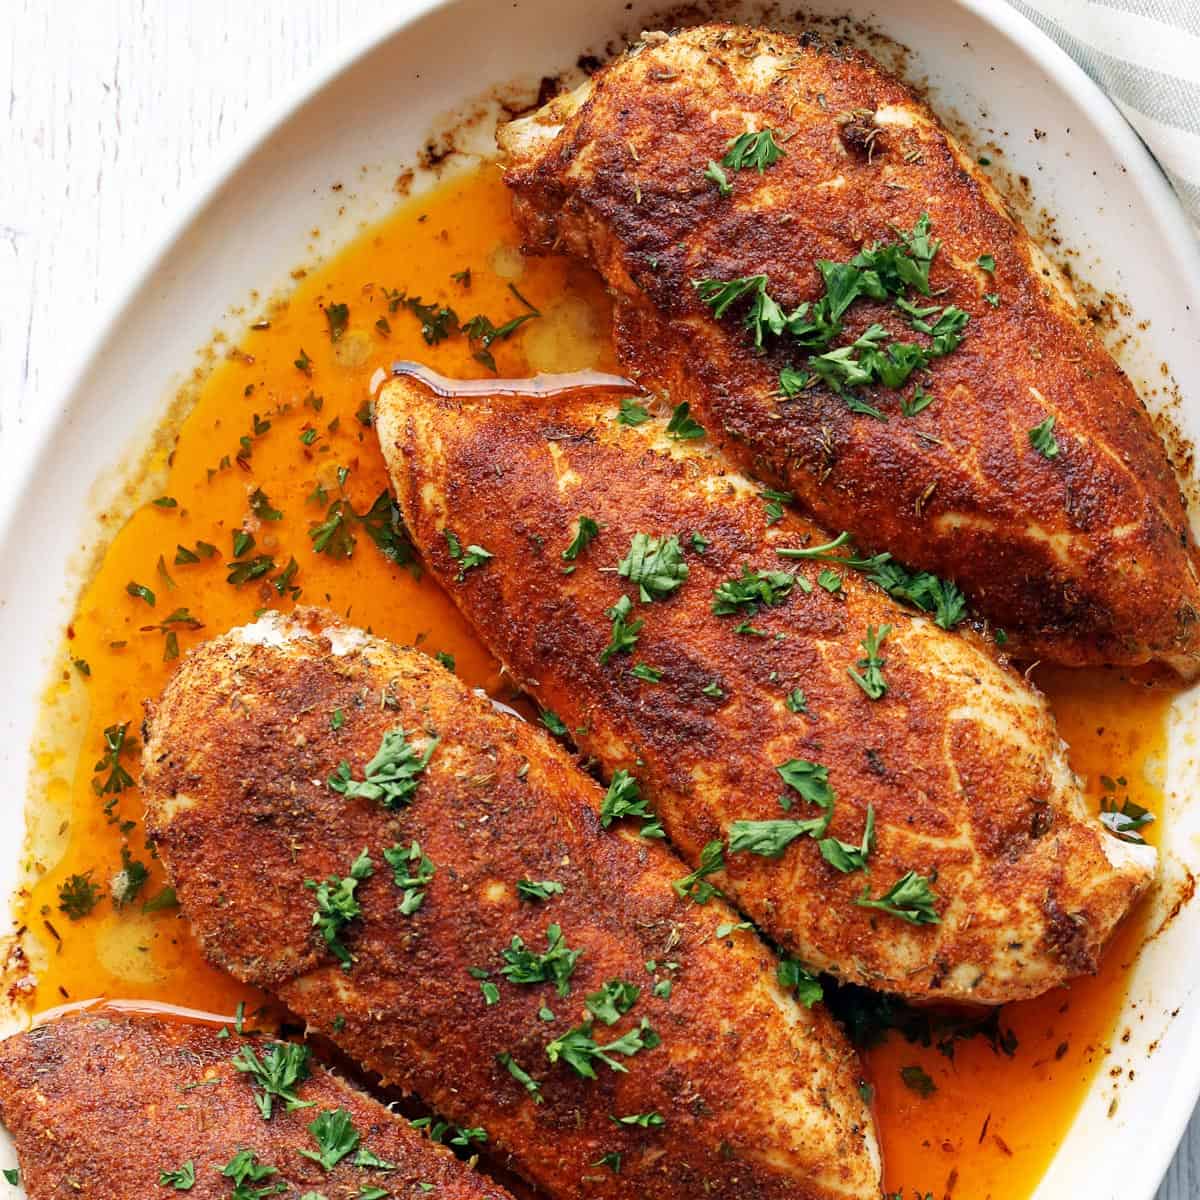 Cajun chicken is served in a white baking dish.